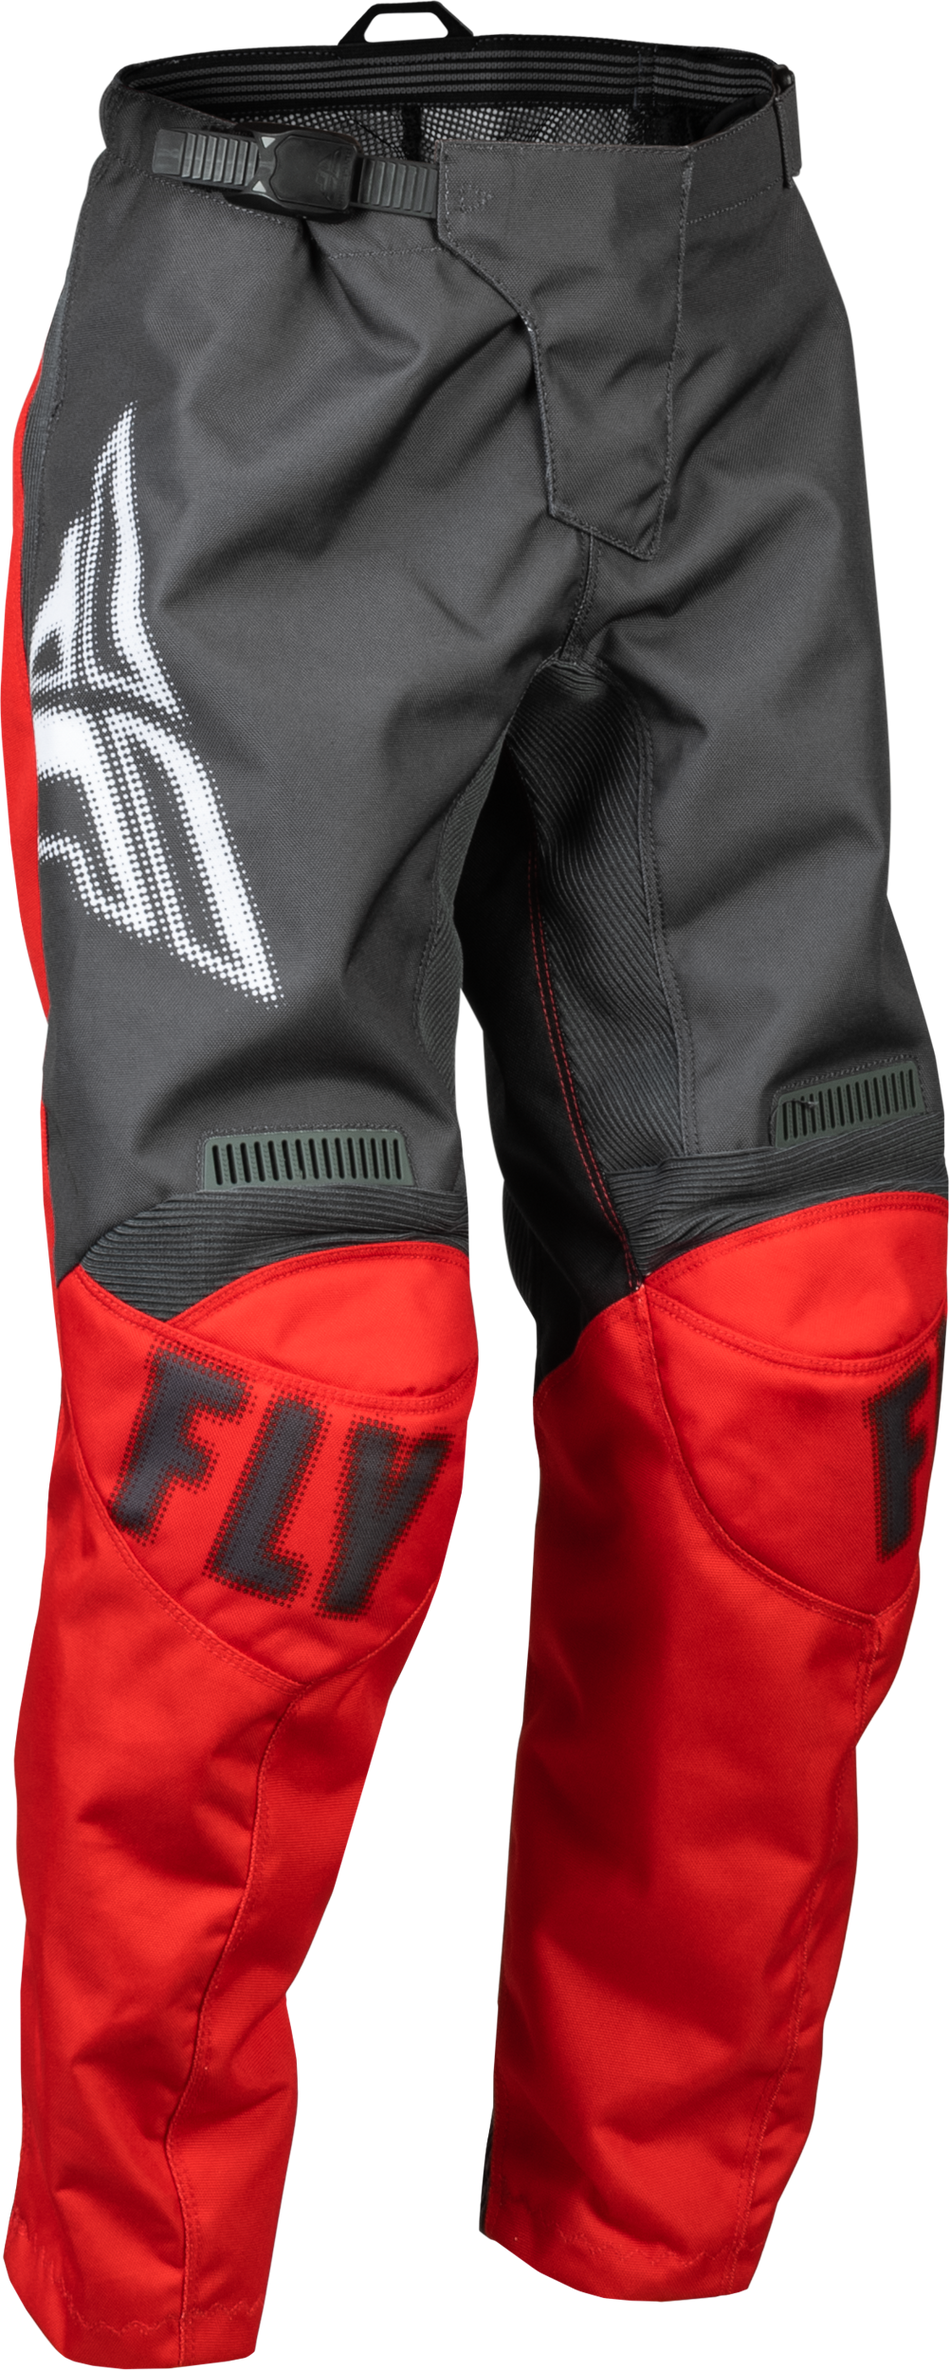 FLY RACING Youth F-16 Pants Grey/Red Sz 20 376-23420